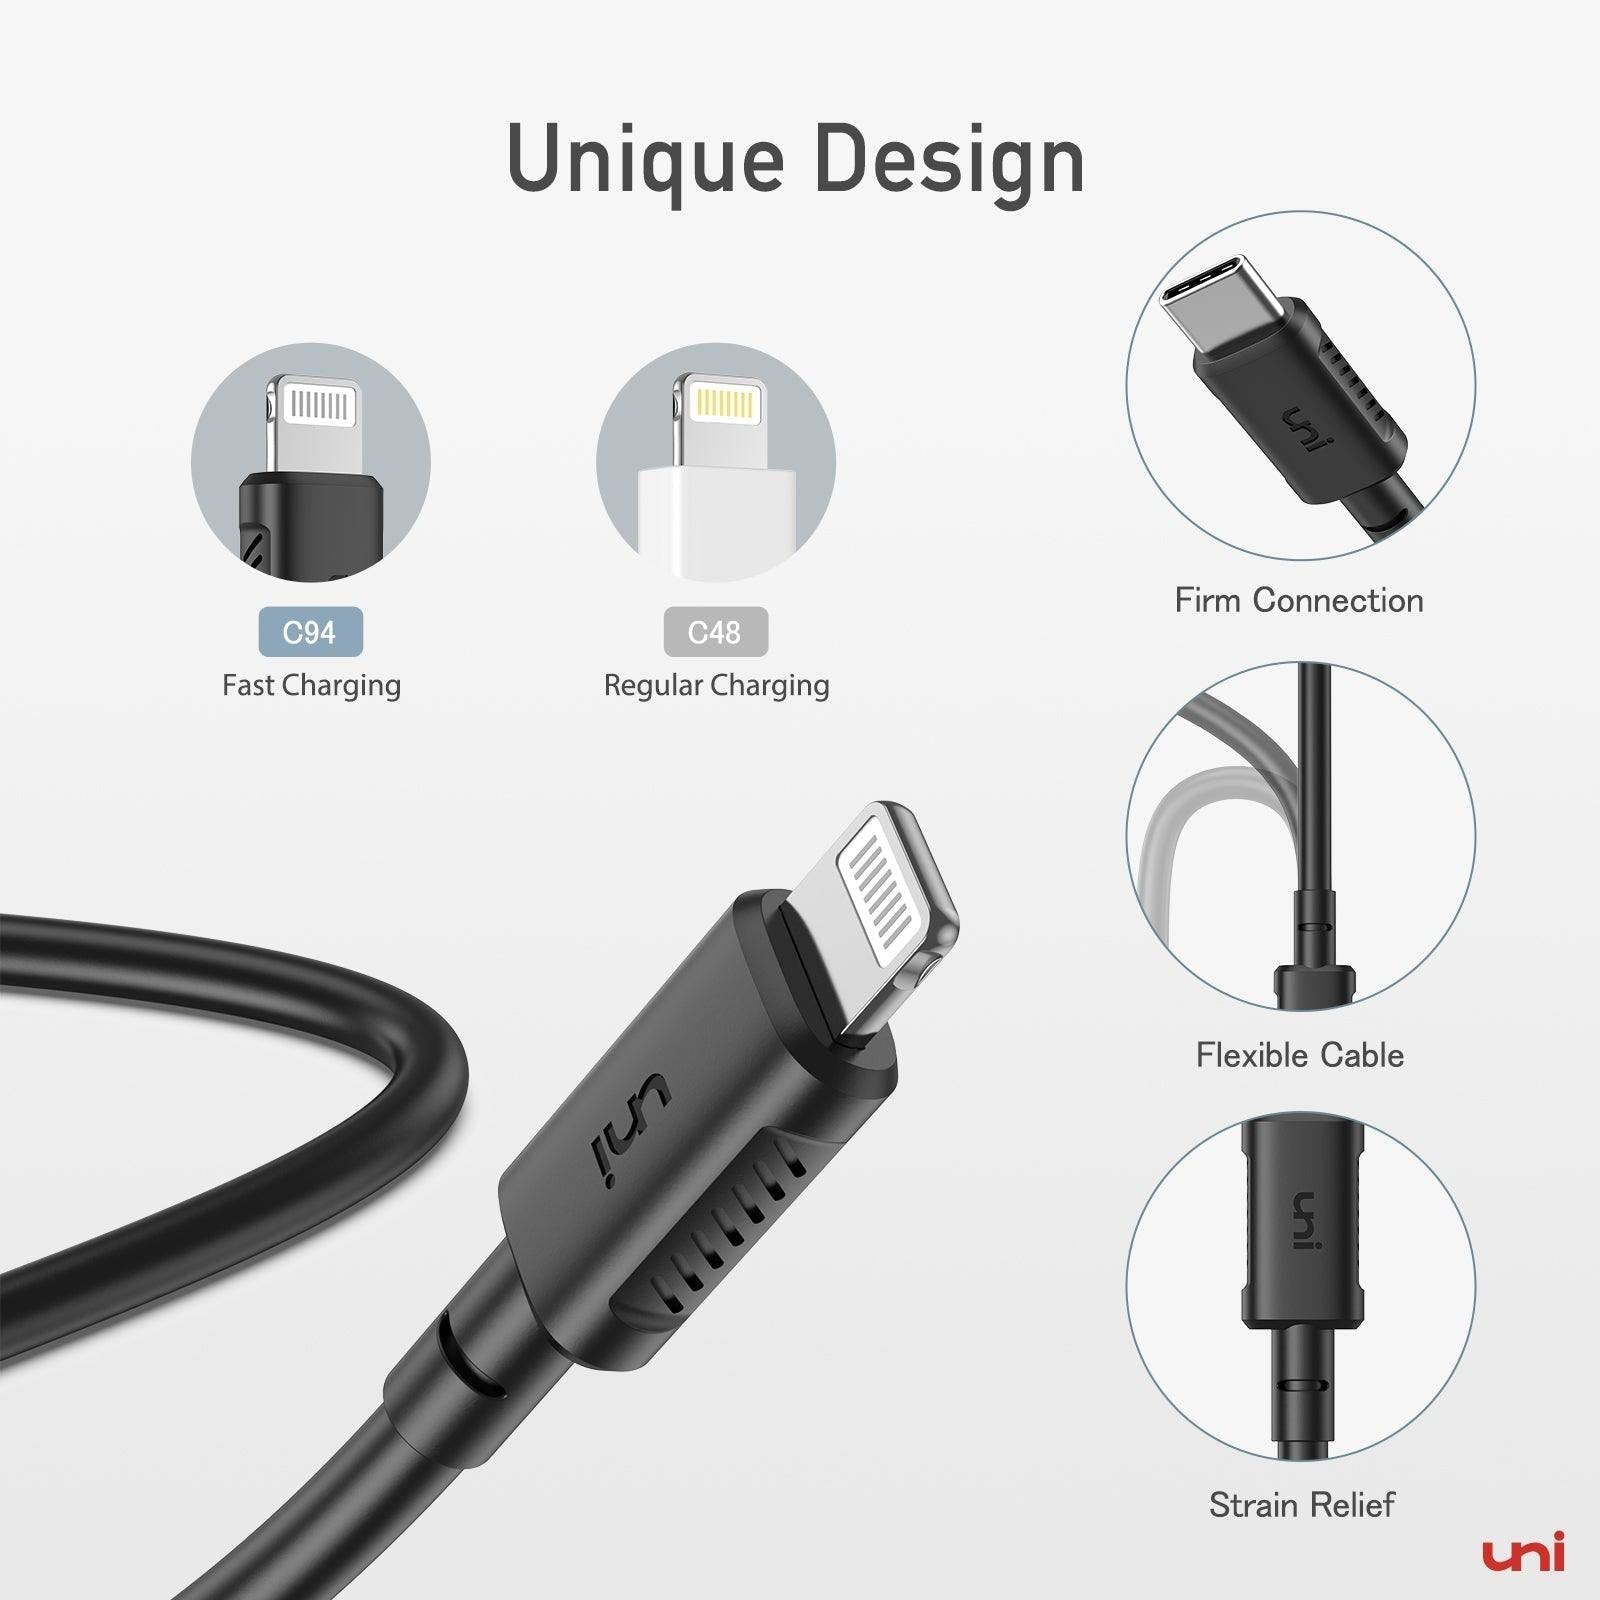 Apple's new Lightning to USB-C iPhone cables and dongles are here